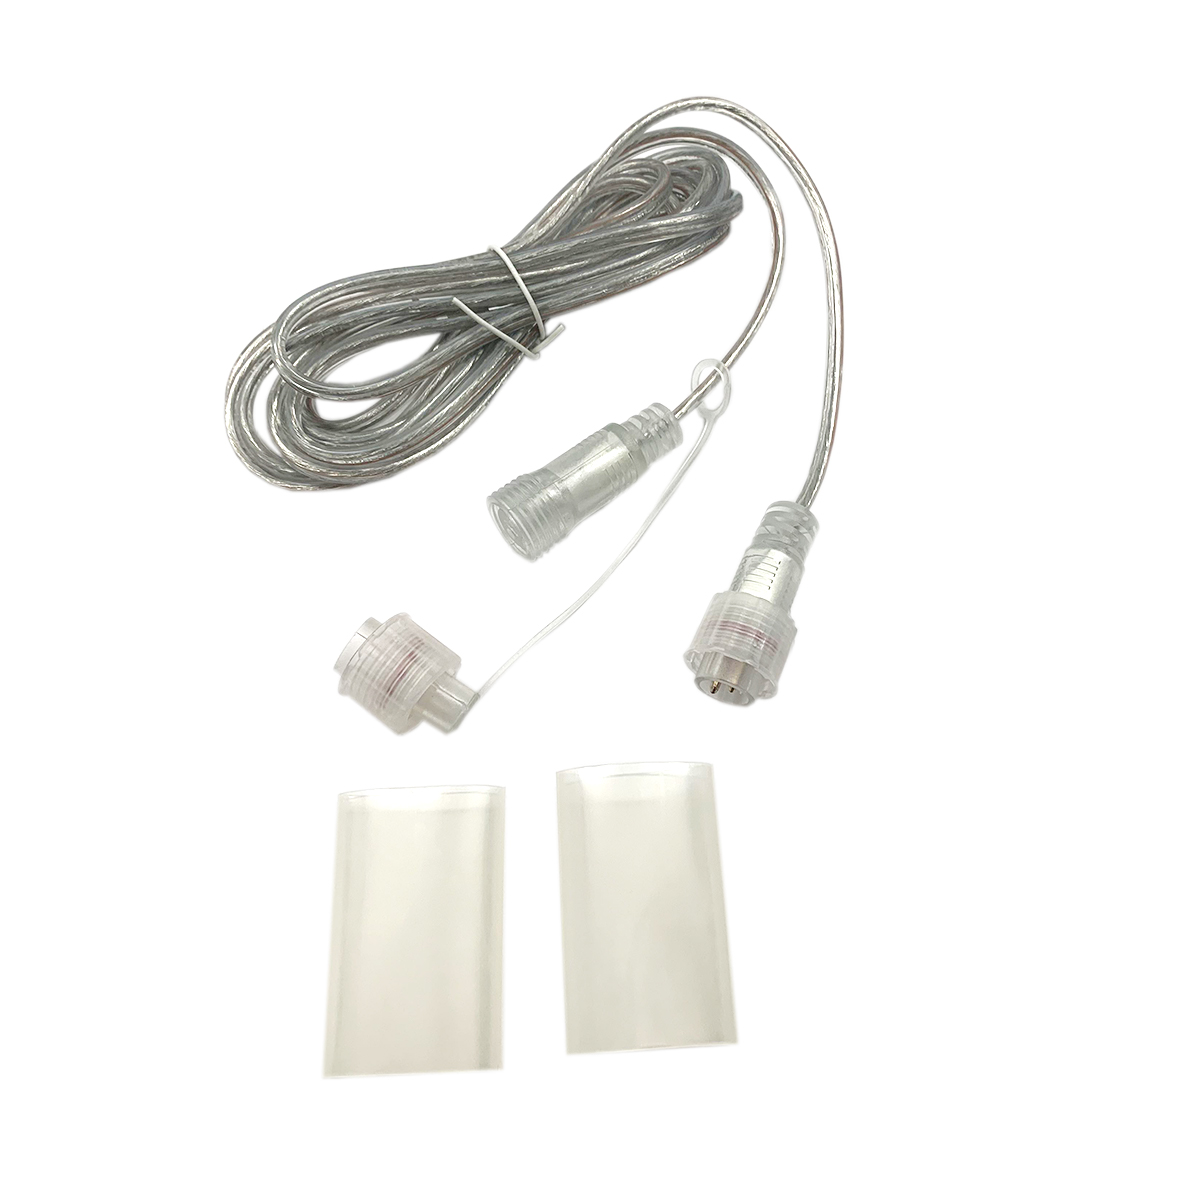 Extension Cable for PVC Christmas Light Strand - 118” - Clear